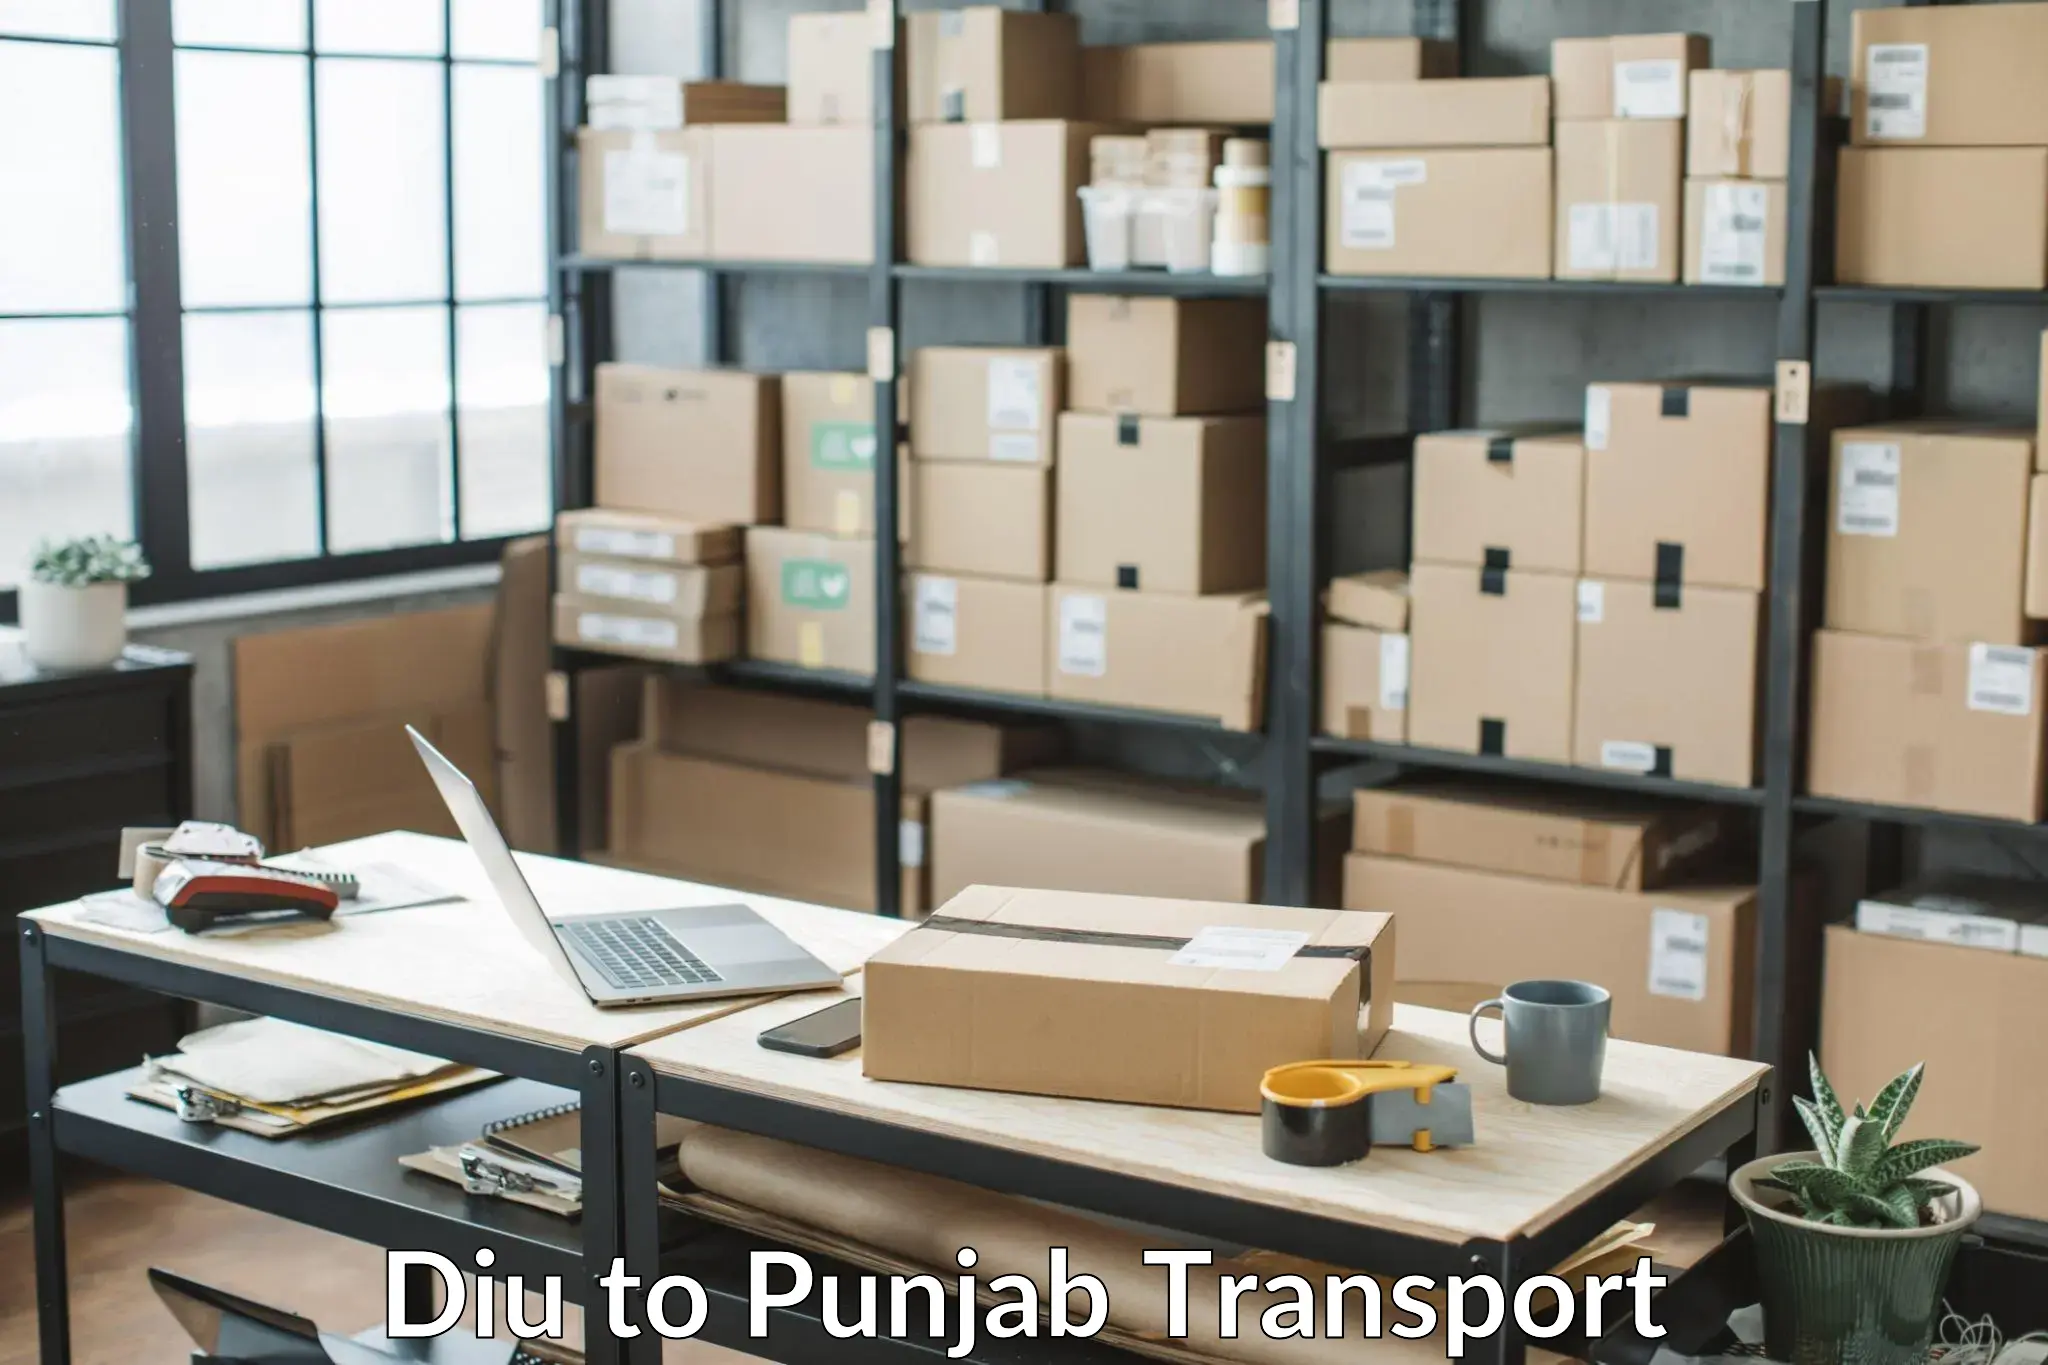 Interstate transport services Diu to Patiala